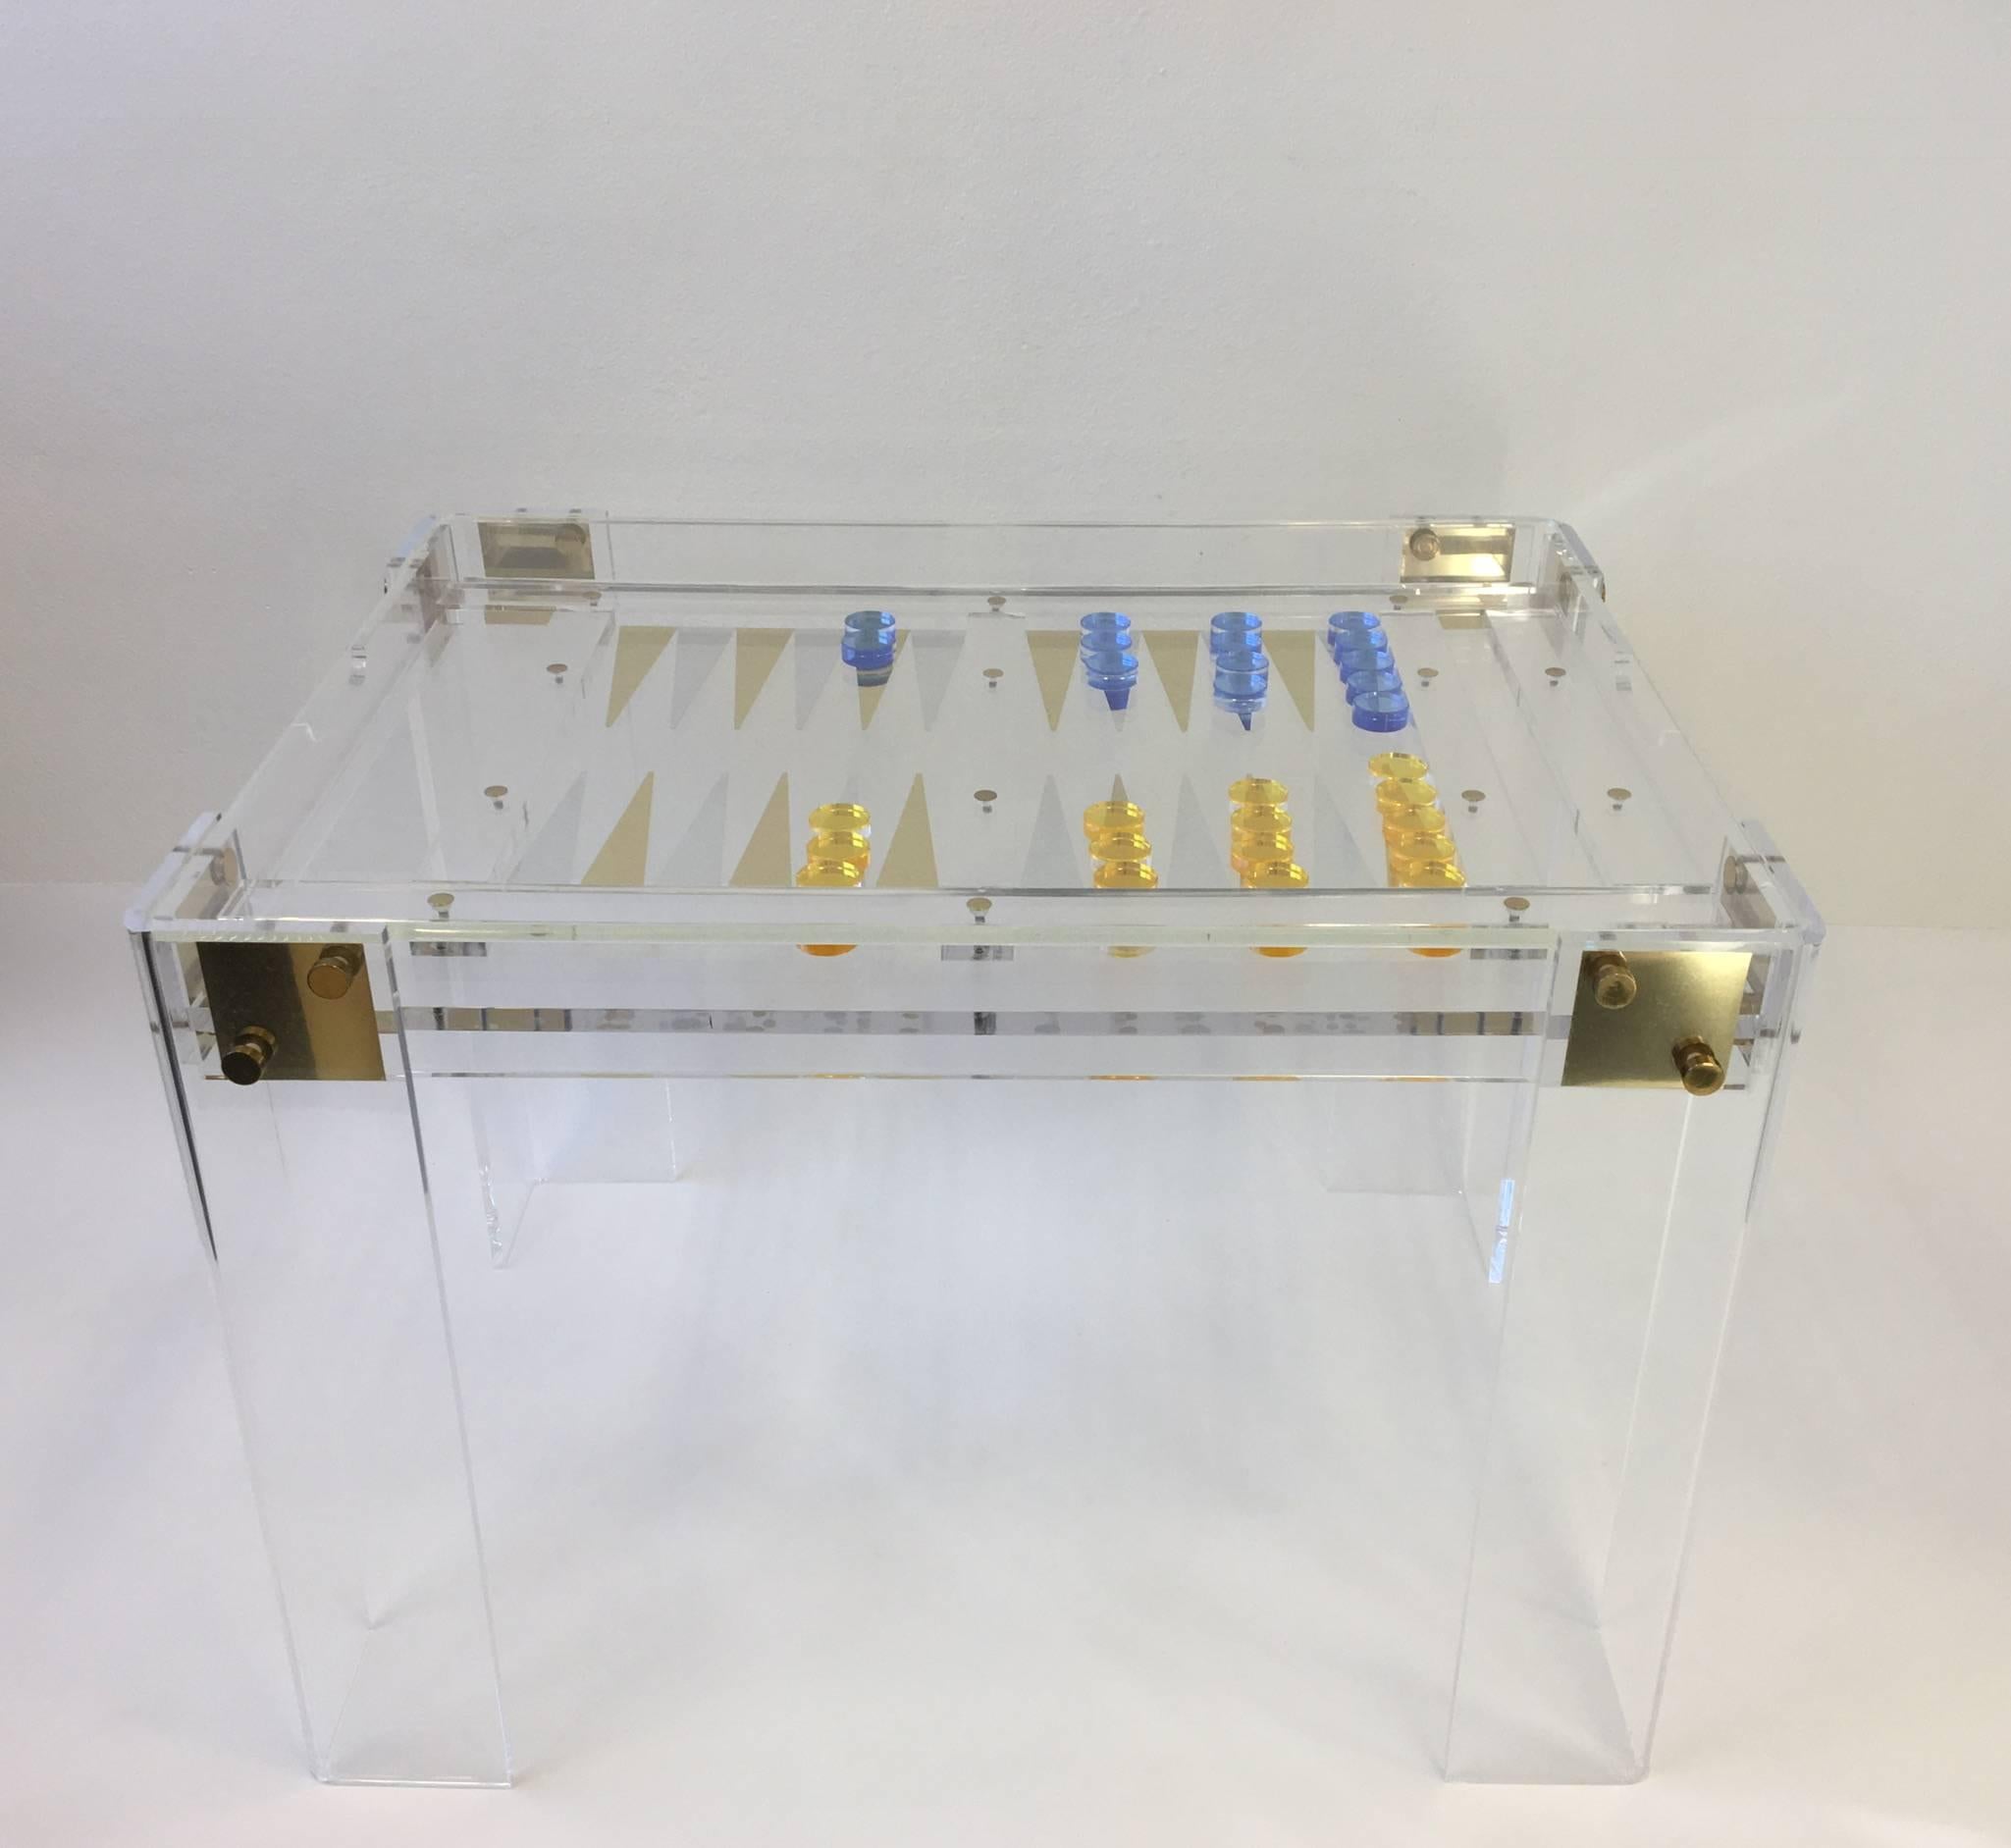 A glamorous clear acrylic with brass hardware designed by renowned designer Charles Hollis Jones in the 1970s. The table has a 1/2 inch thick acrylic top that goes over the backgammon board, so you can play cards also. 
The table has been newly